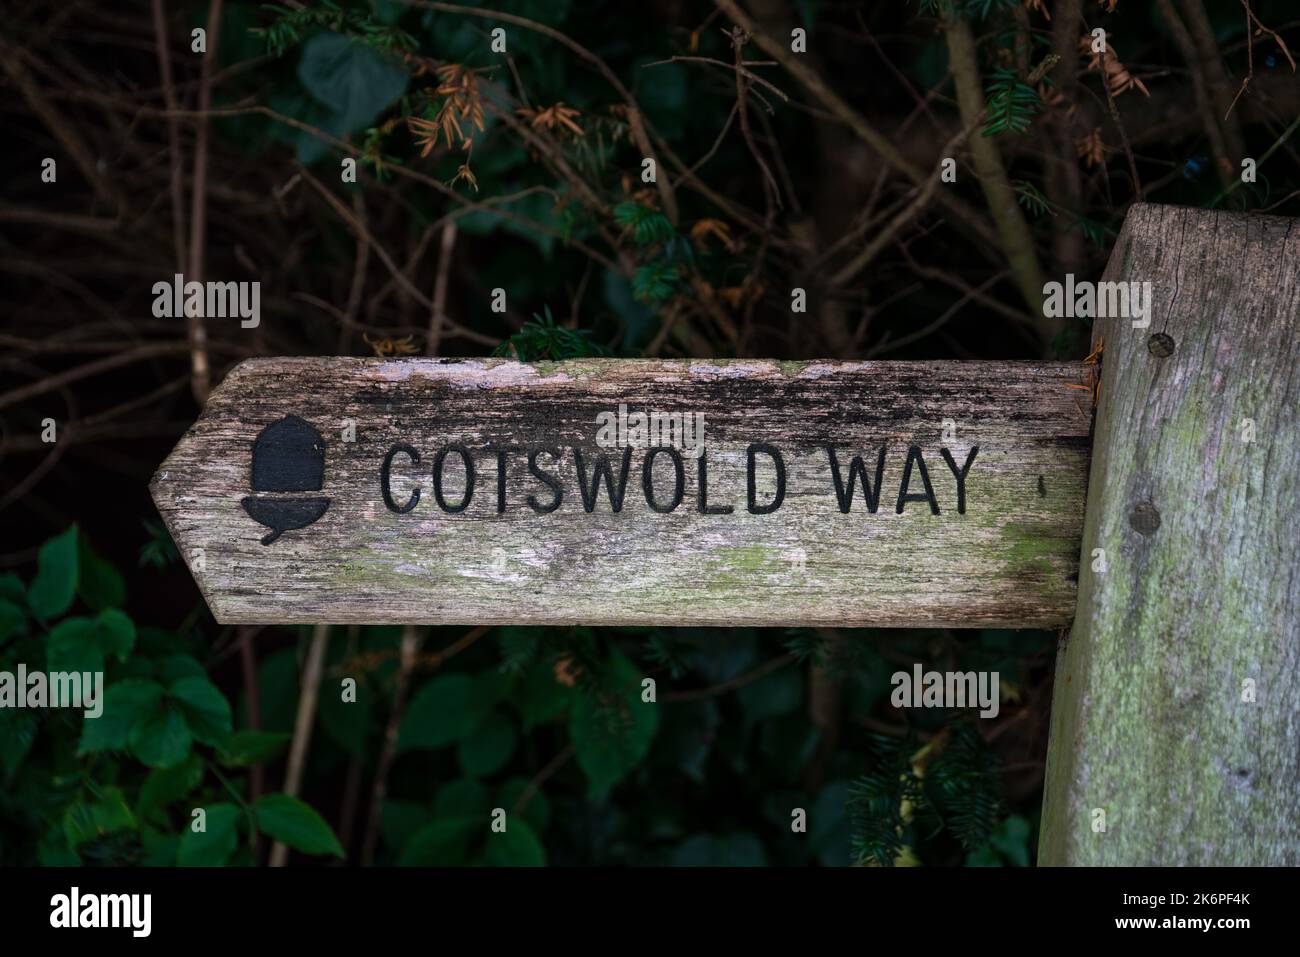 Cotswold Way signpost. A national Trail of over 100 miles from Chipping Camden to Bath. Gloucestershire, England, United Kingdom Stock Photo